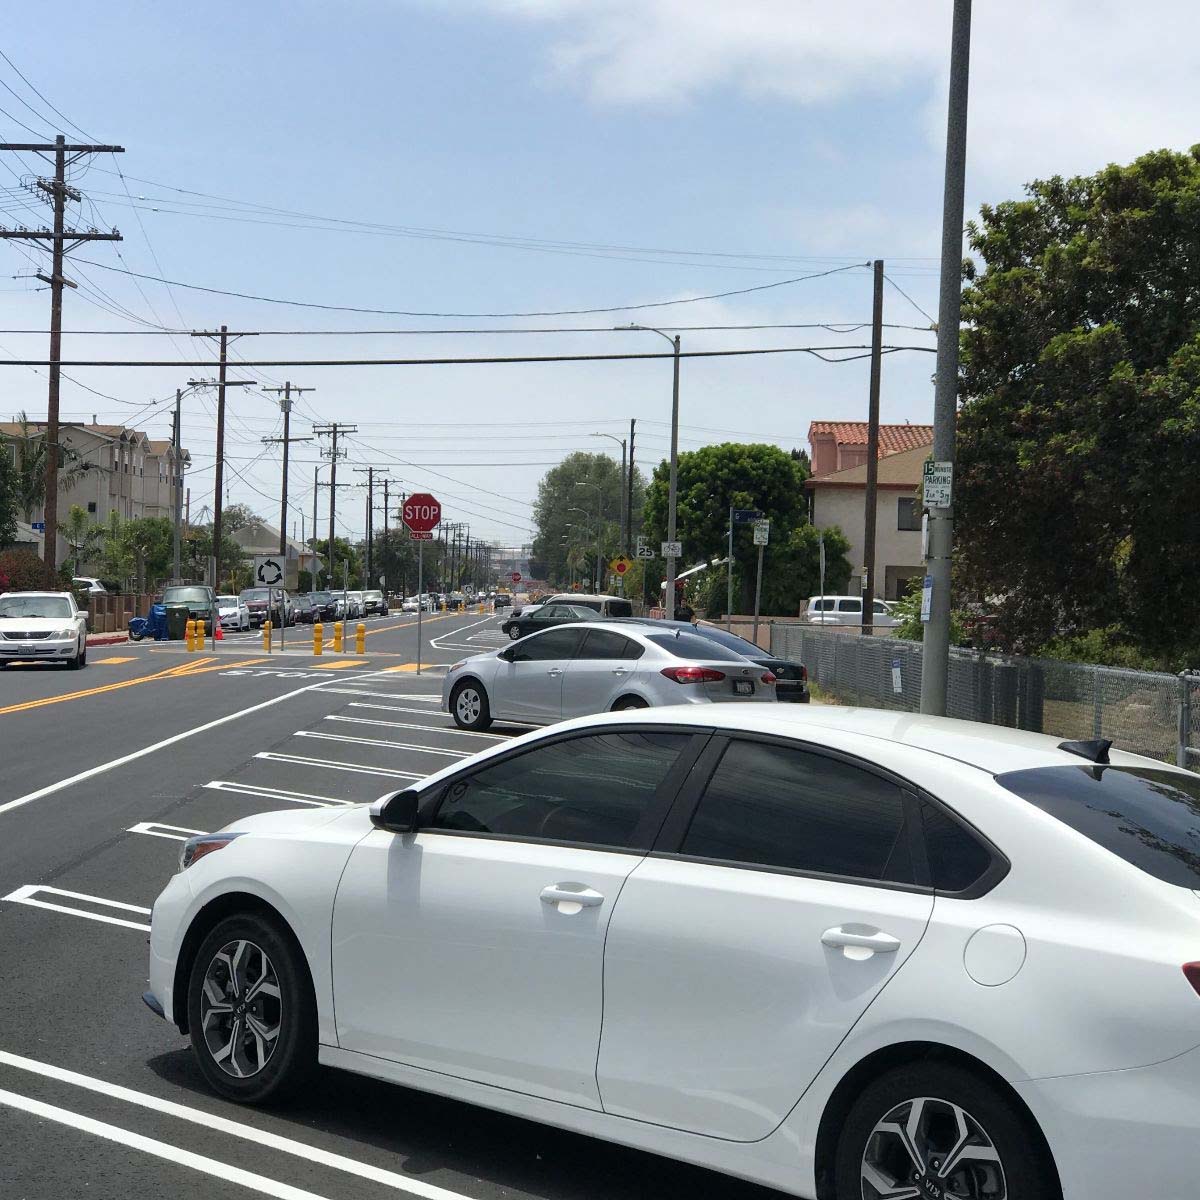 New Back-In Angle Parking Installed On Neptune Ave